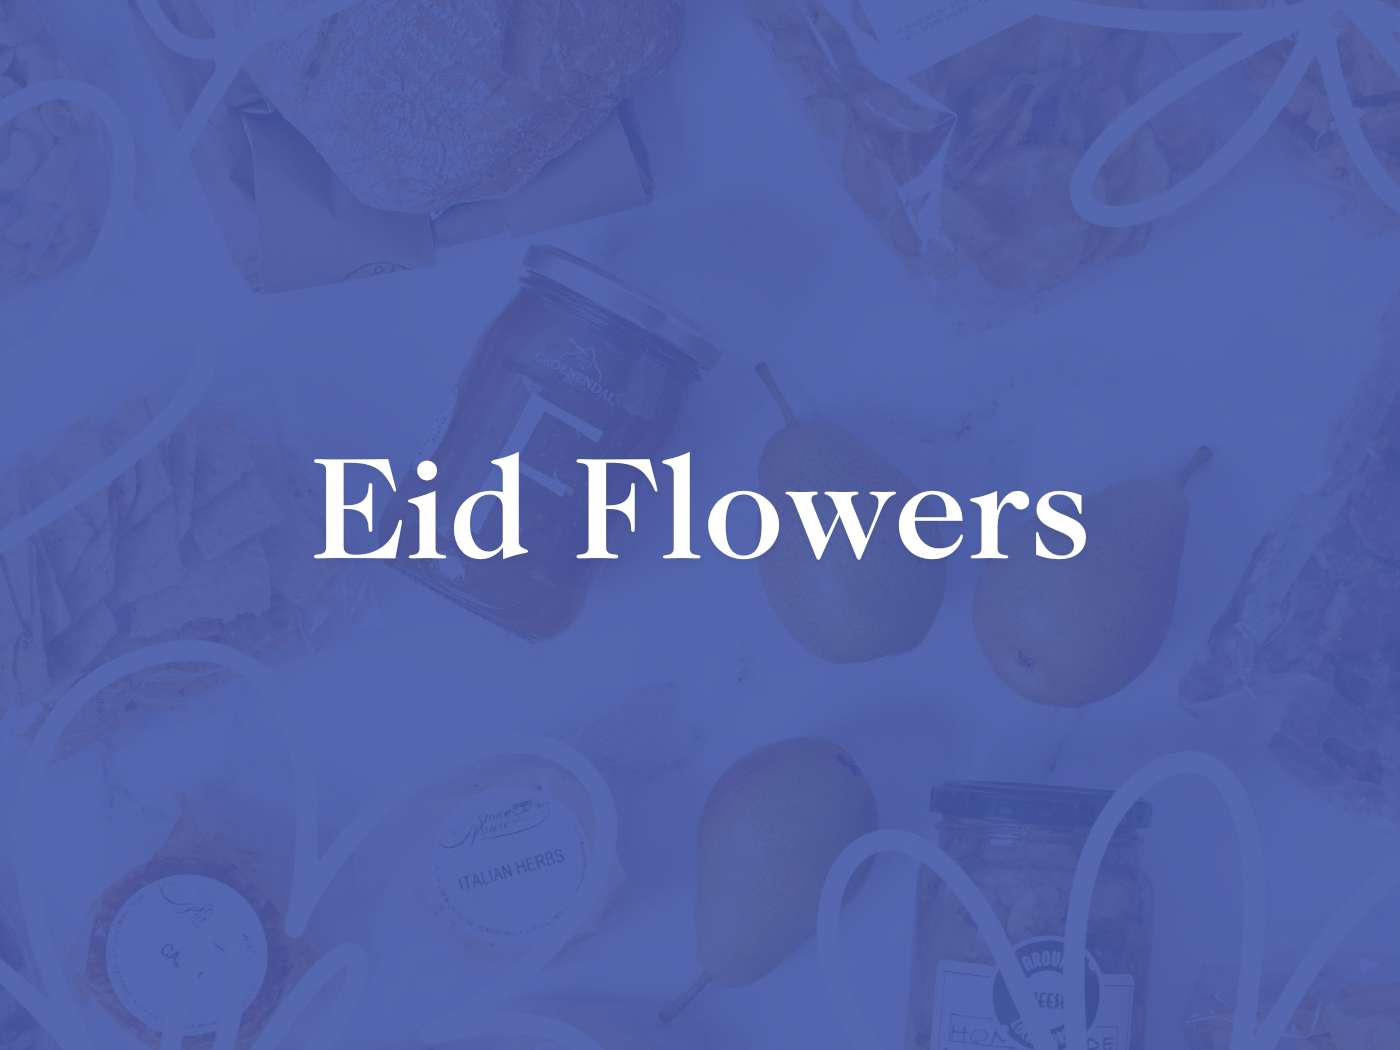 Promotional image for the Eid Flowers Collection, featuring a blend of food items and text overlay, part of the exclusive offerings by Fabulous Flowers and Gifts.